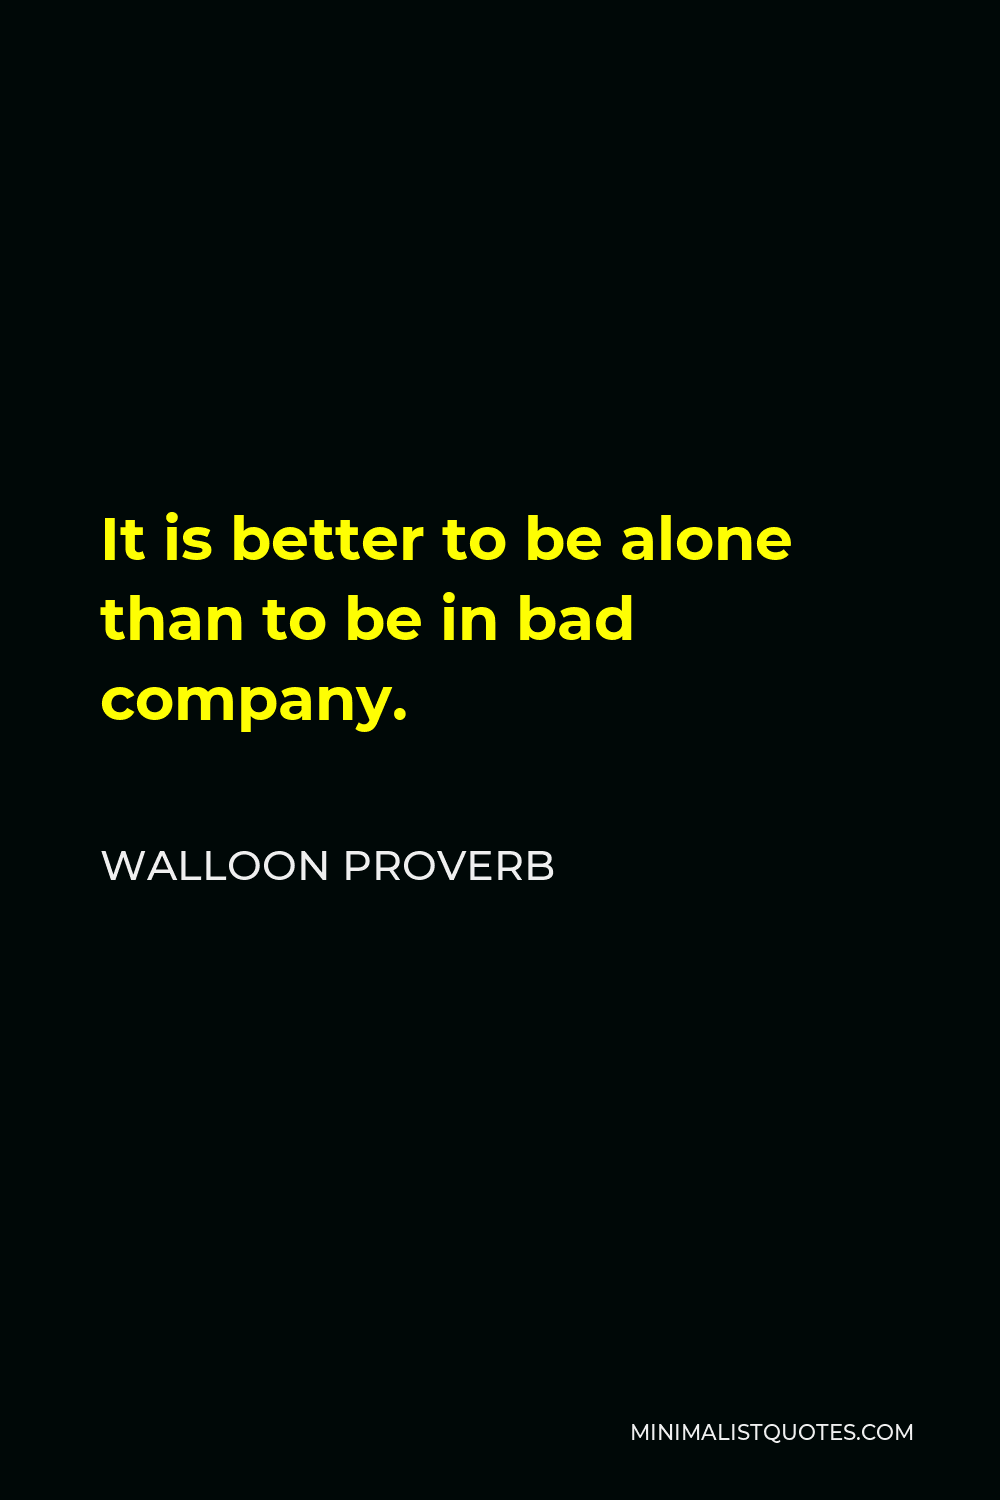 Walloon Proverb Quote - It is better to be alone than to be in bad company.